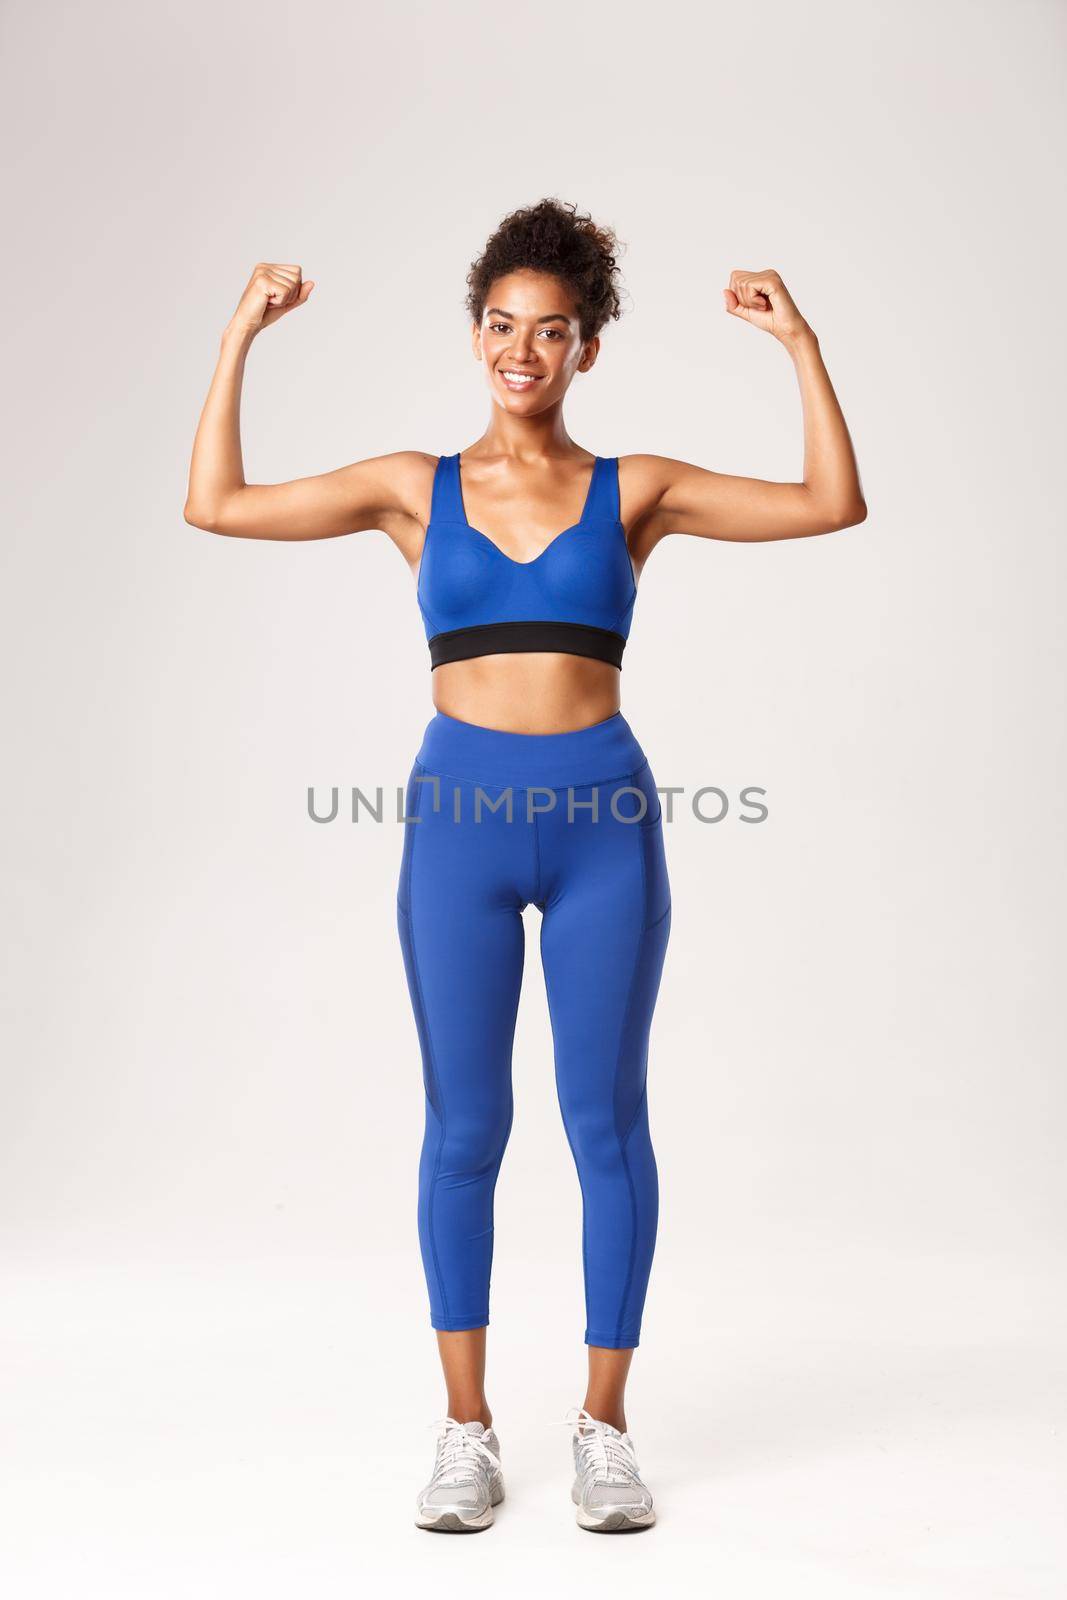 Full length of strong and confident african american girl showing her muscles, flex biceps and smiling, demonstrate gym and workout progress, standing voer white background.